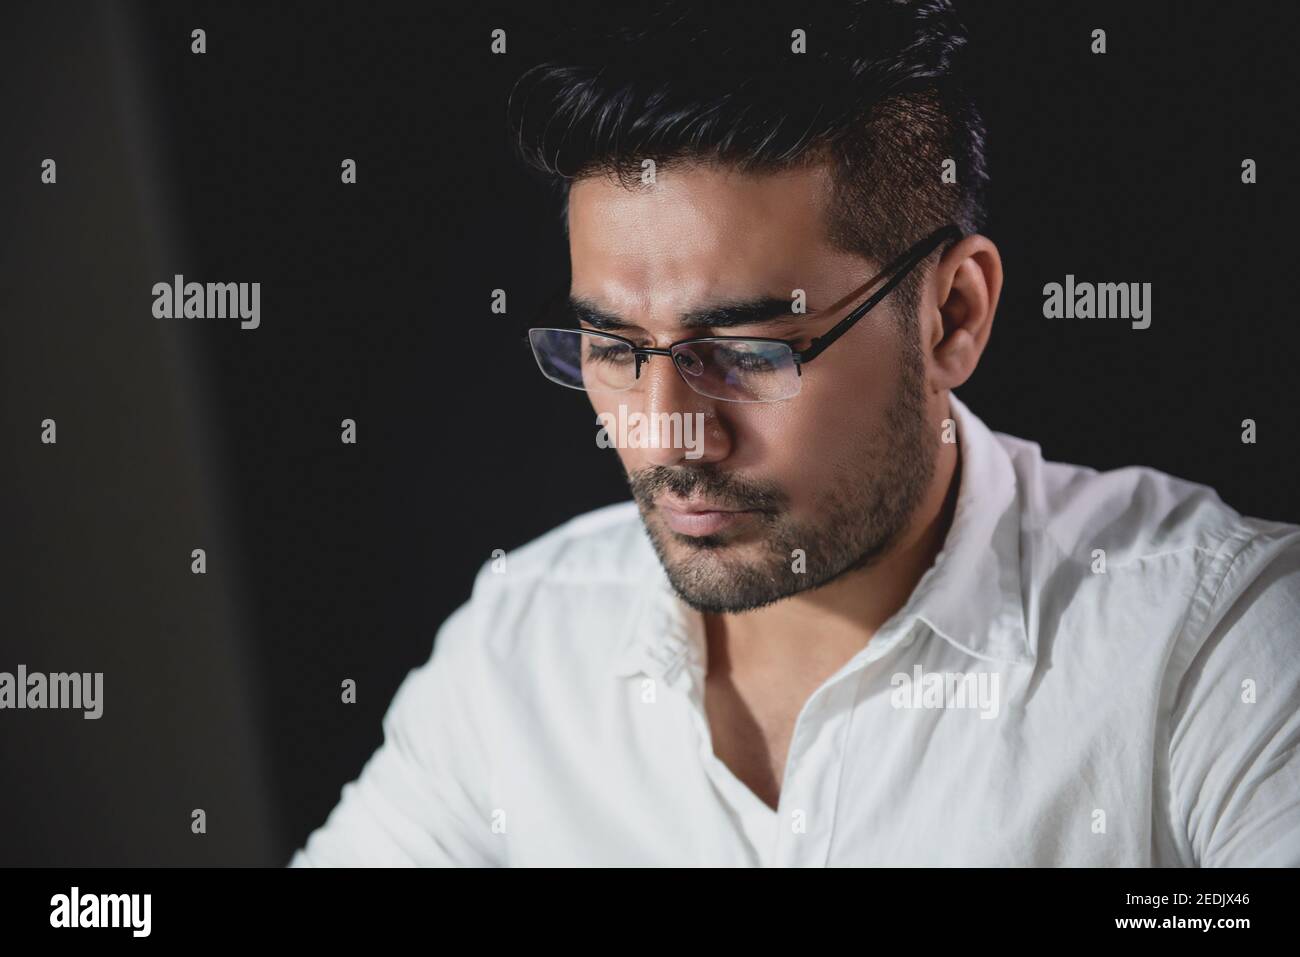 Handsome Asian businessman concentrating on working at night with serious face Stock Photo